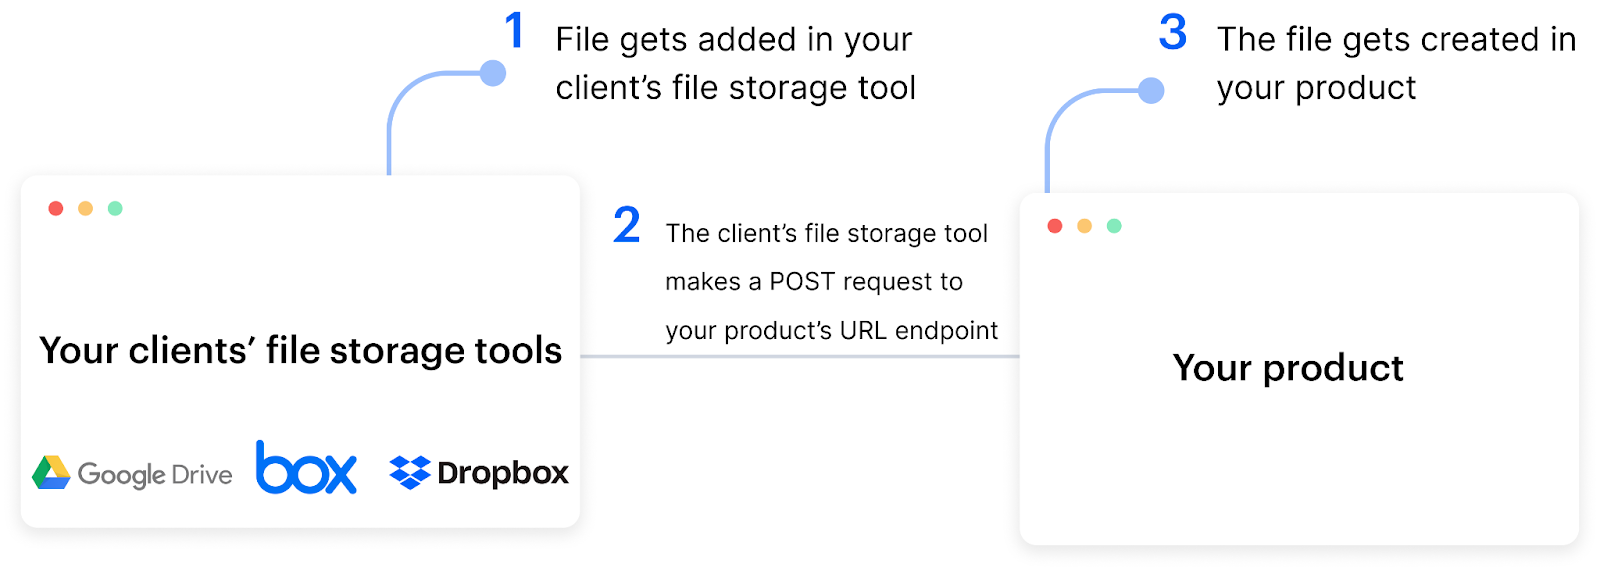 Webhook event that syncs clients' files with your product